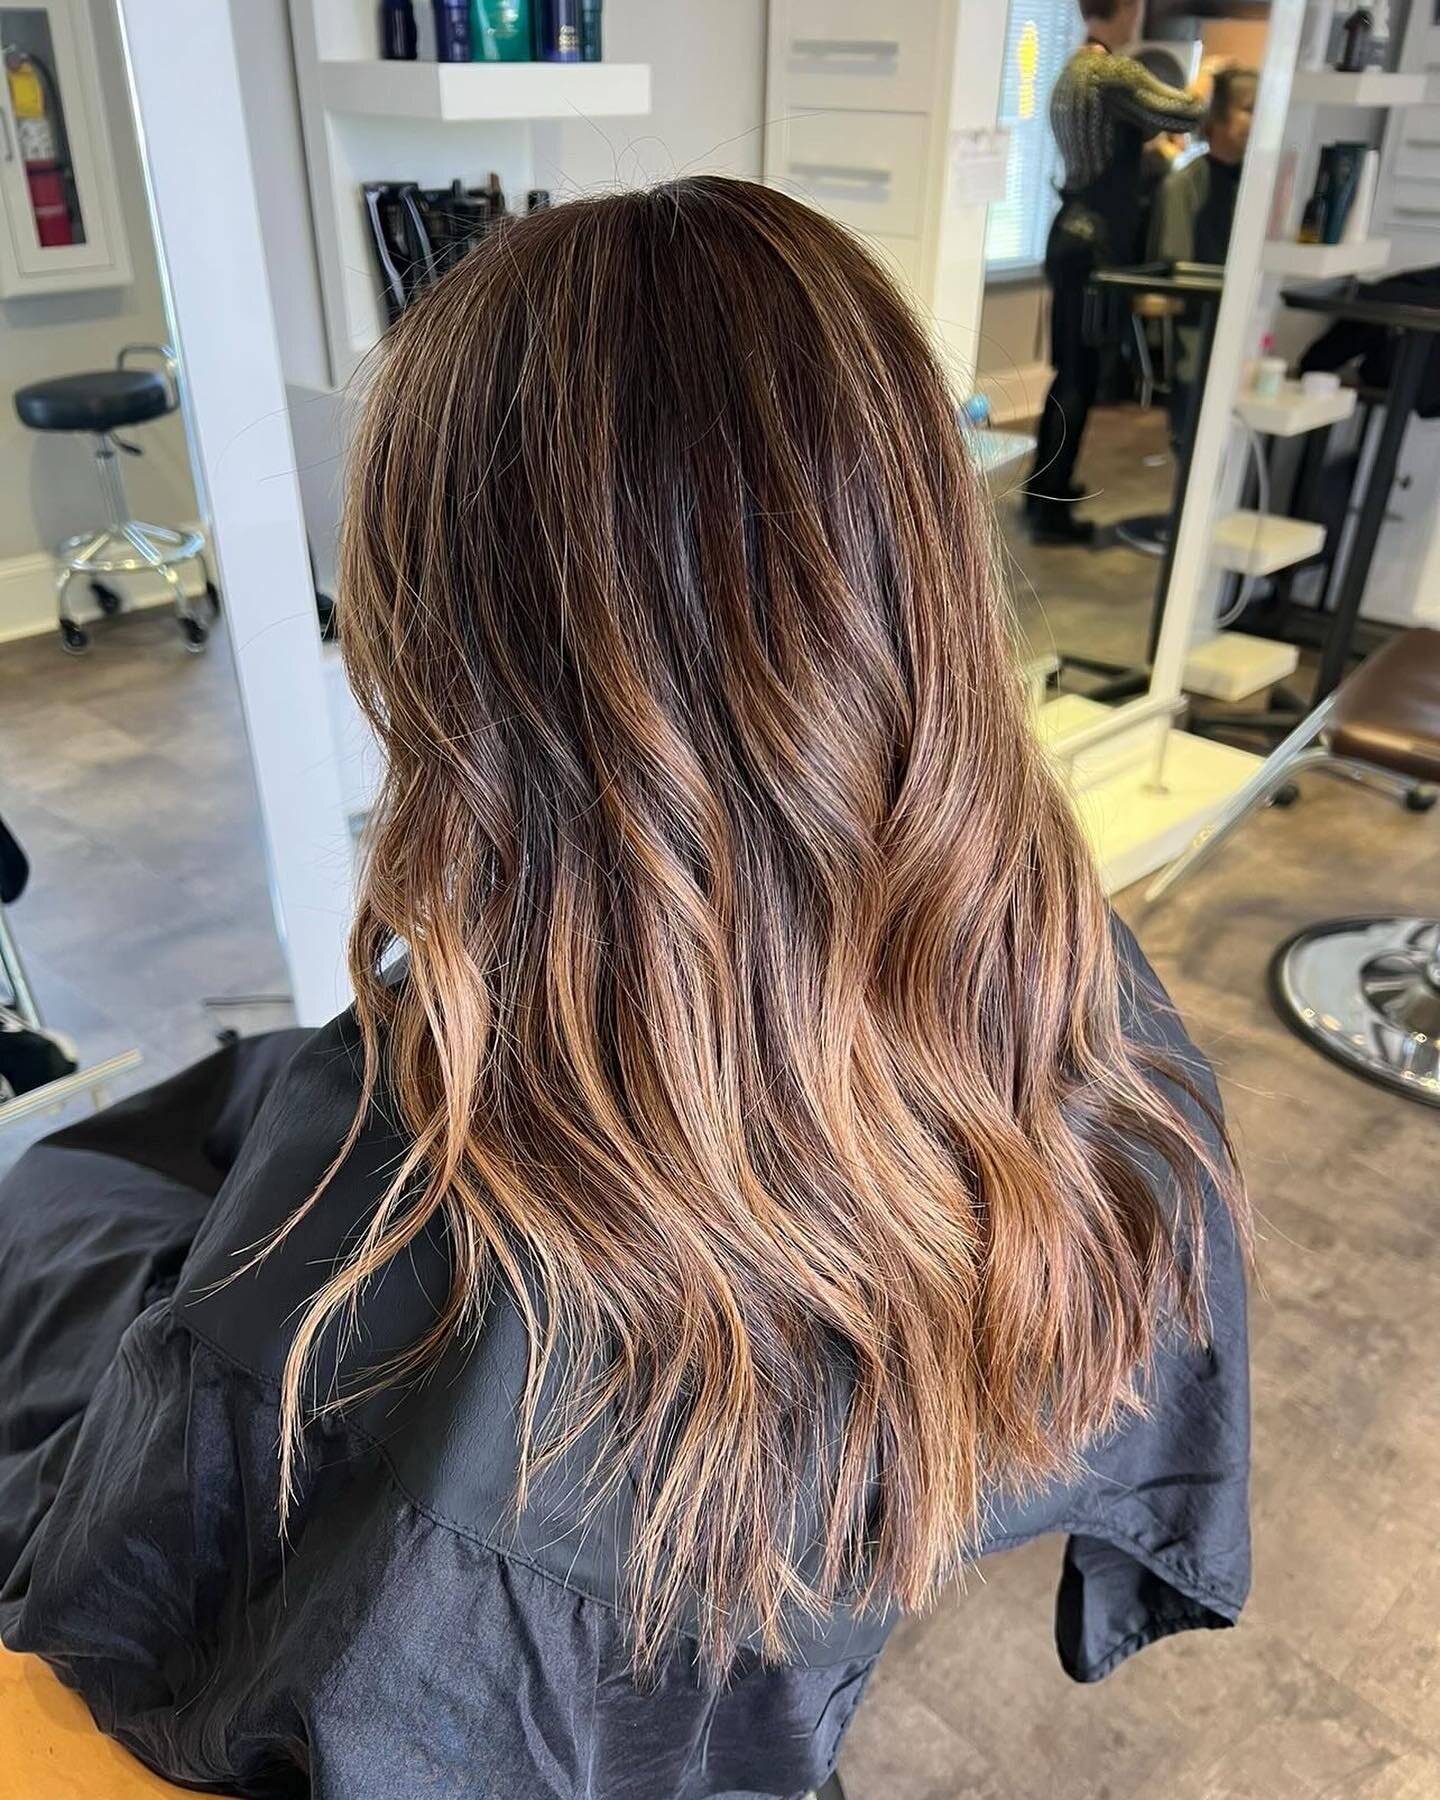 Carmel highlights done by @carlos_martinez_ramirez 🤎 We have openings next week for color and haircuts, call today to book!